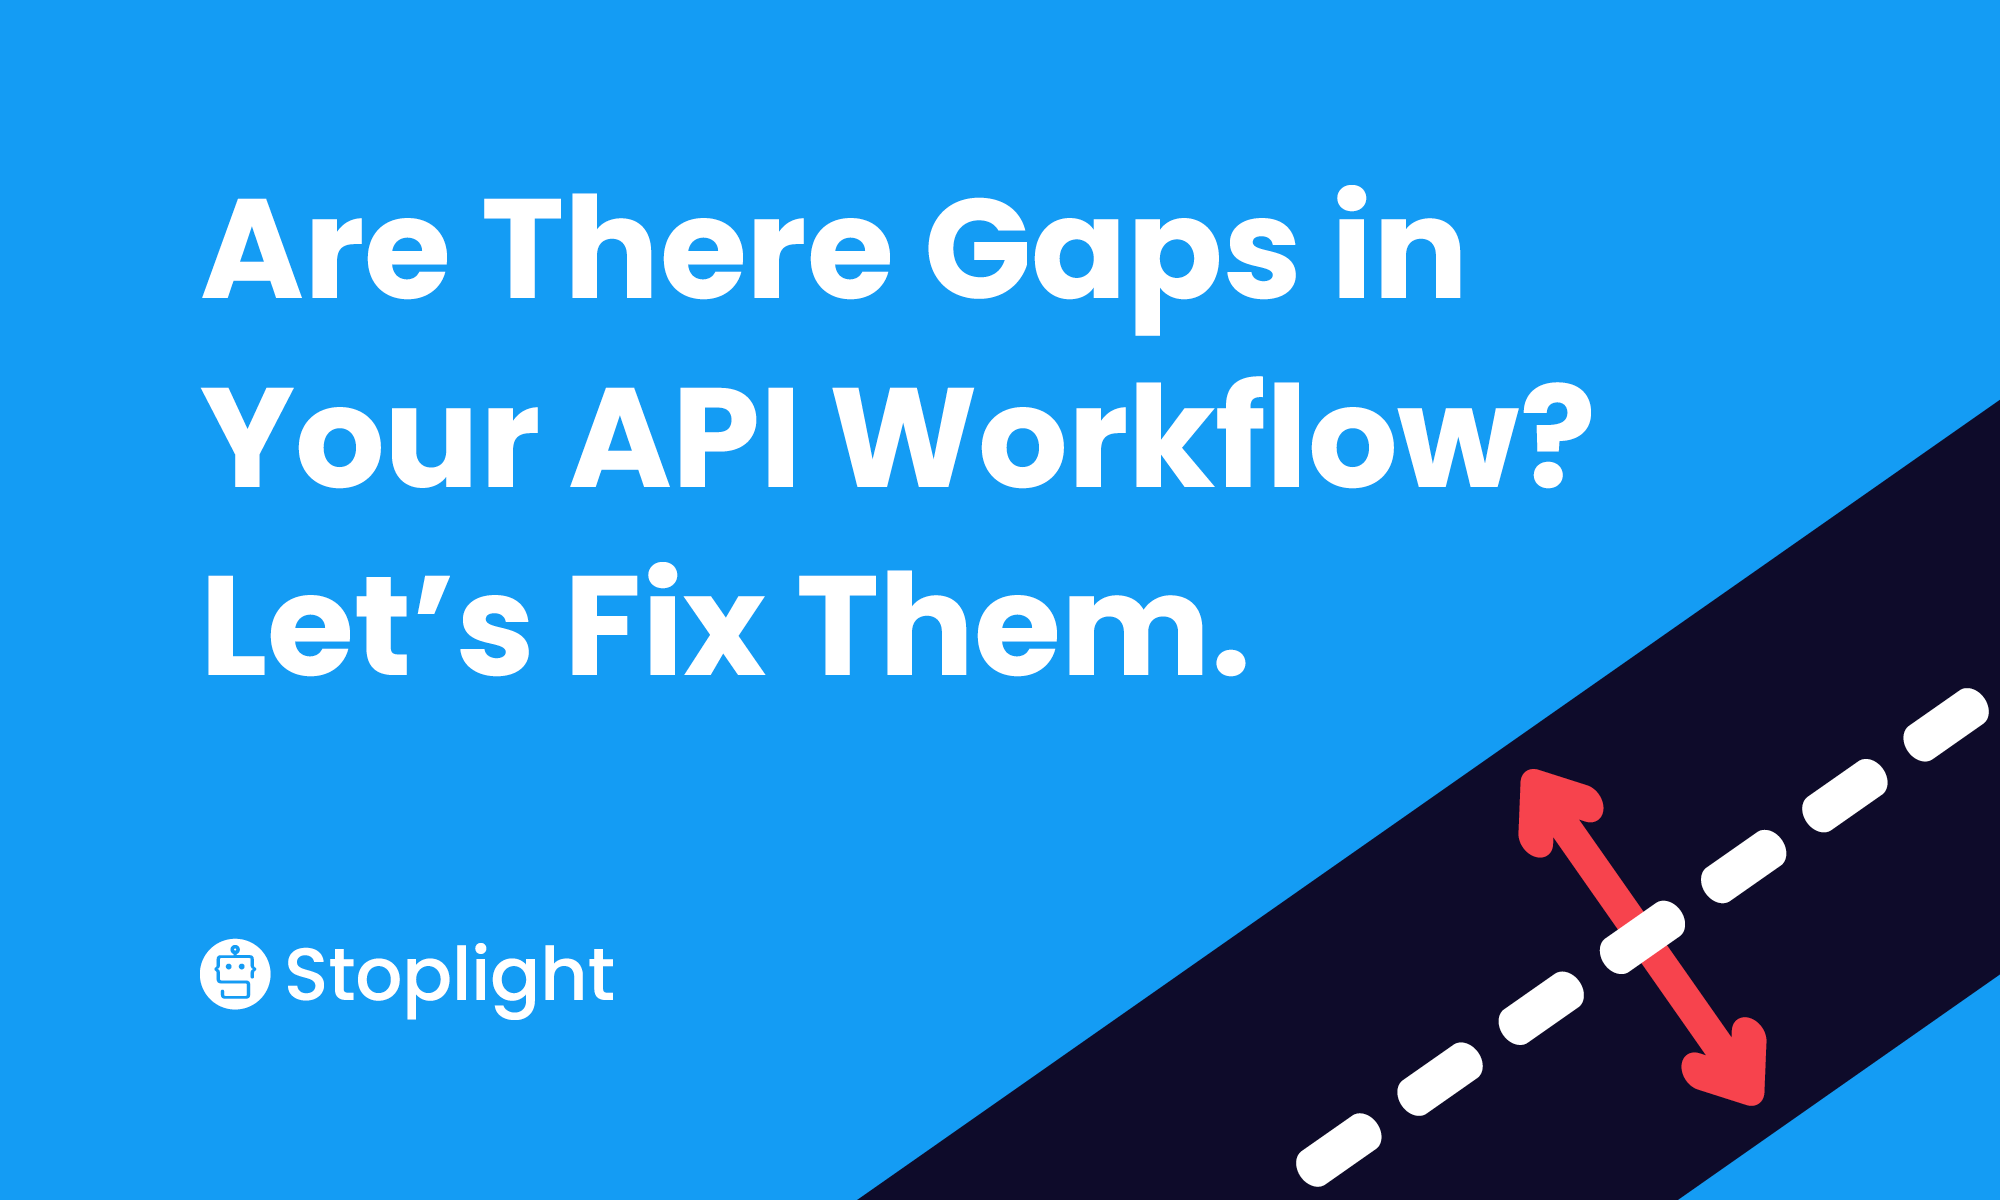 Are There Gaps in Your API Workflow? Let’s Fix Them.